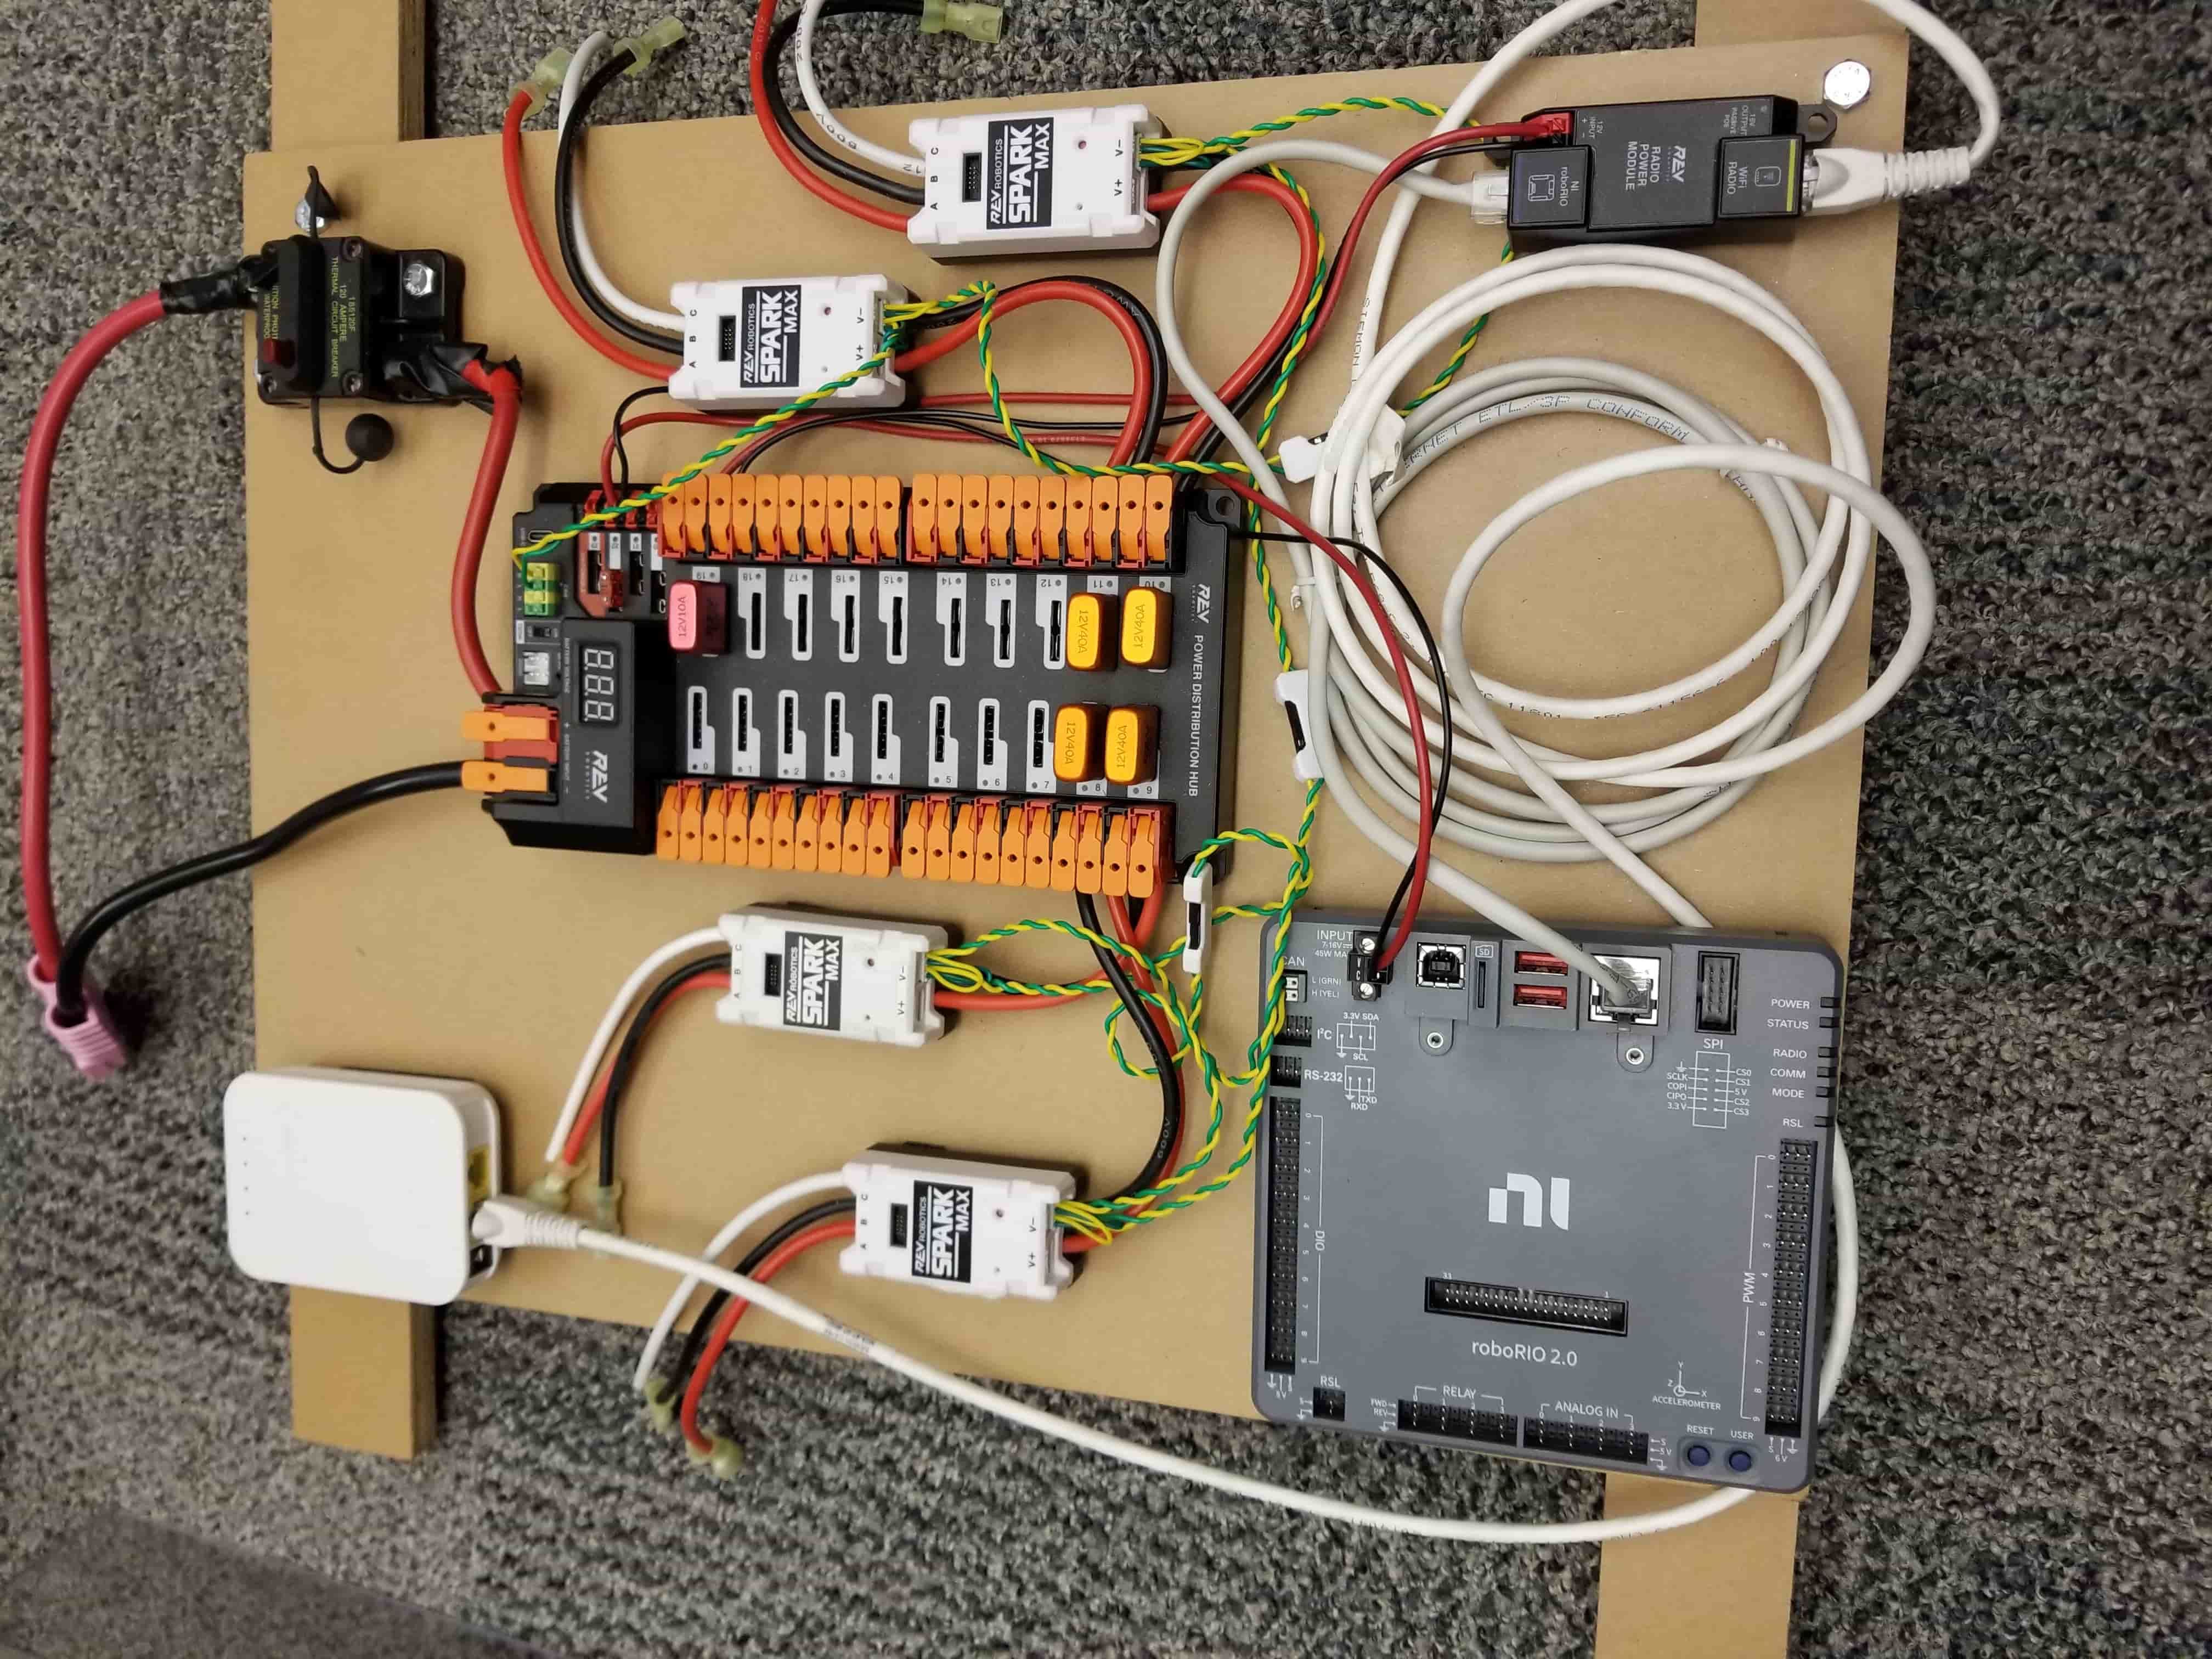 A basic wiring layout with CTR components.